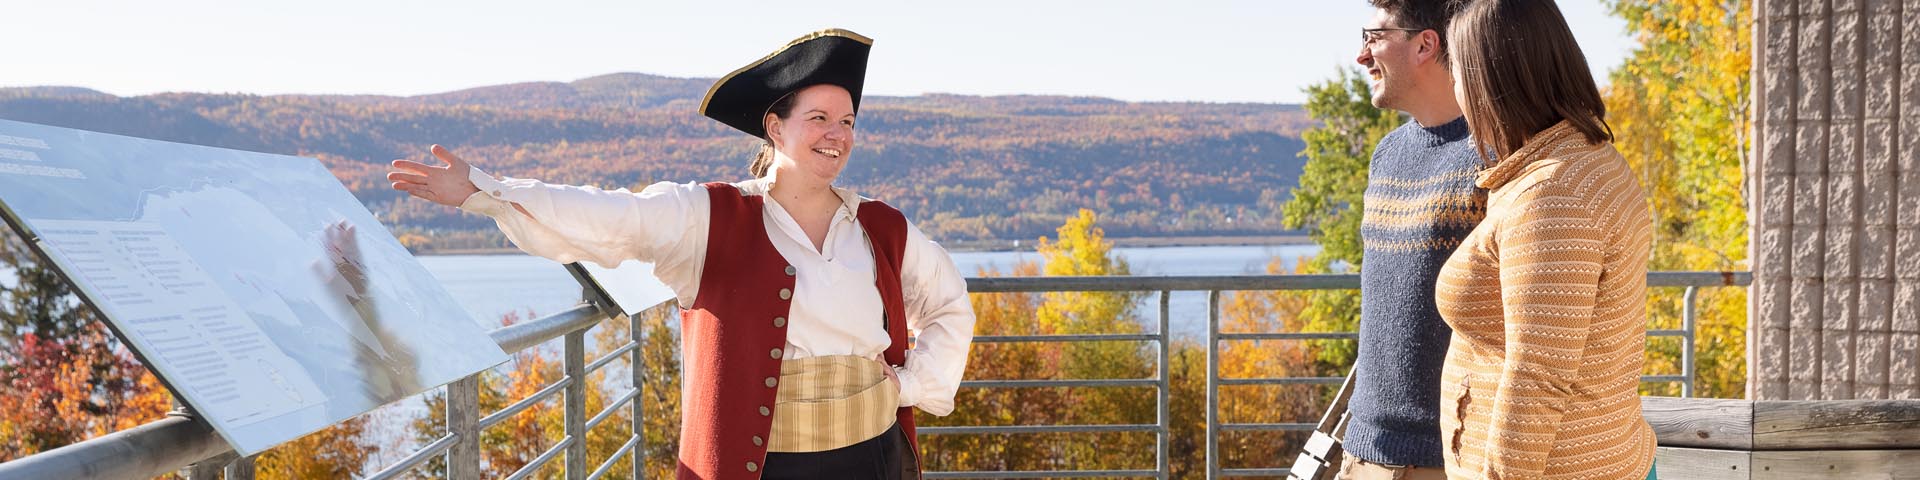 A historical figure talks with visitors against the backdrop of the Restigouche River.